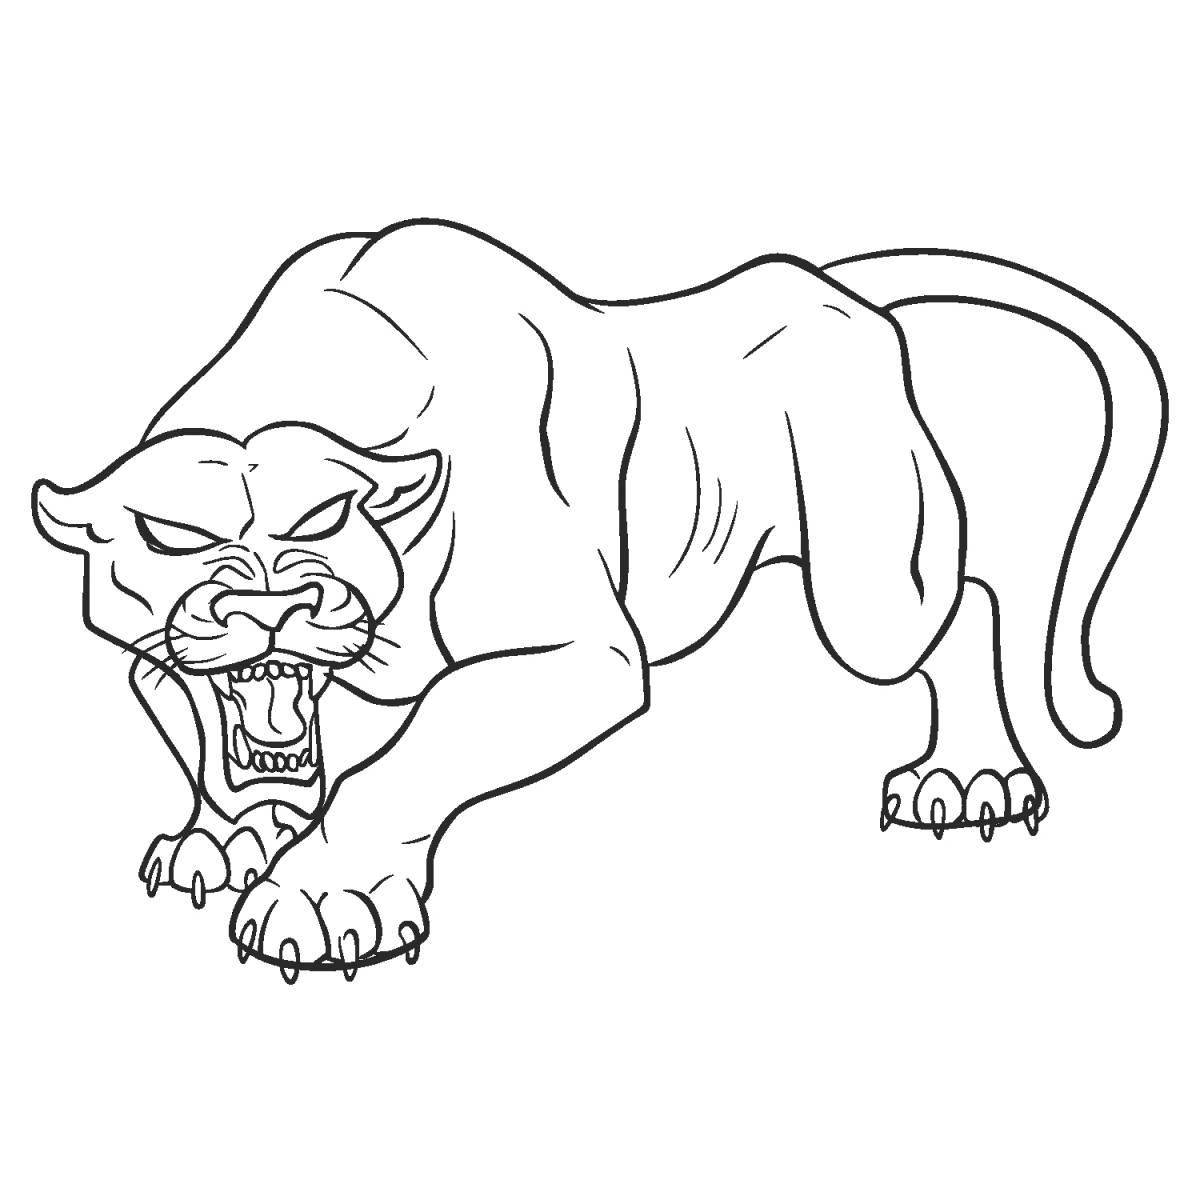 Amazing saber tooth tiger coloring page